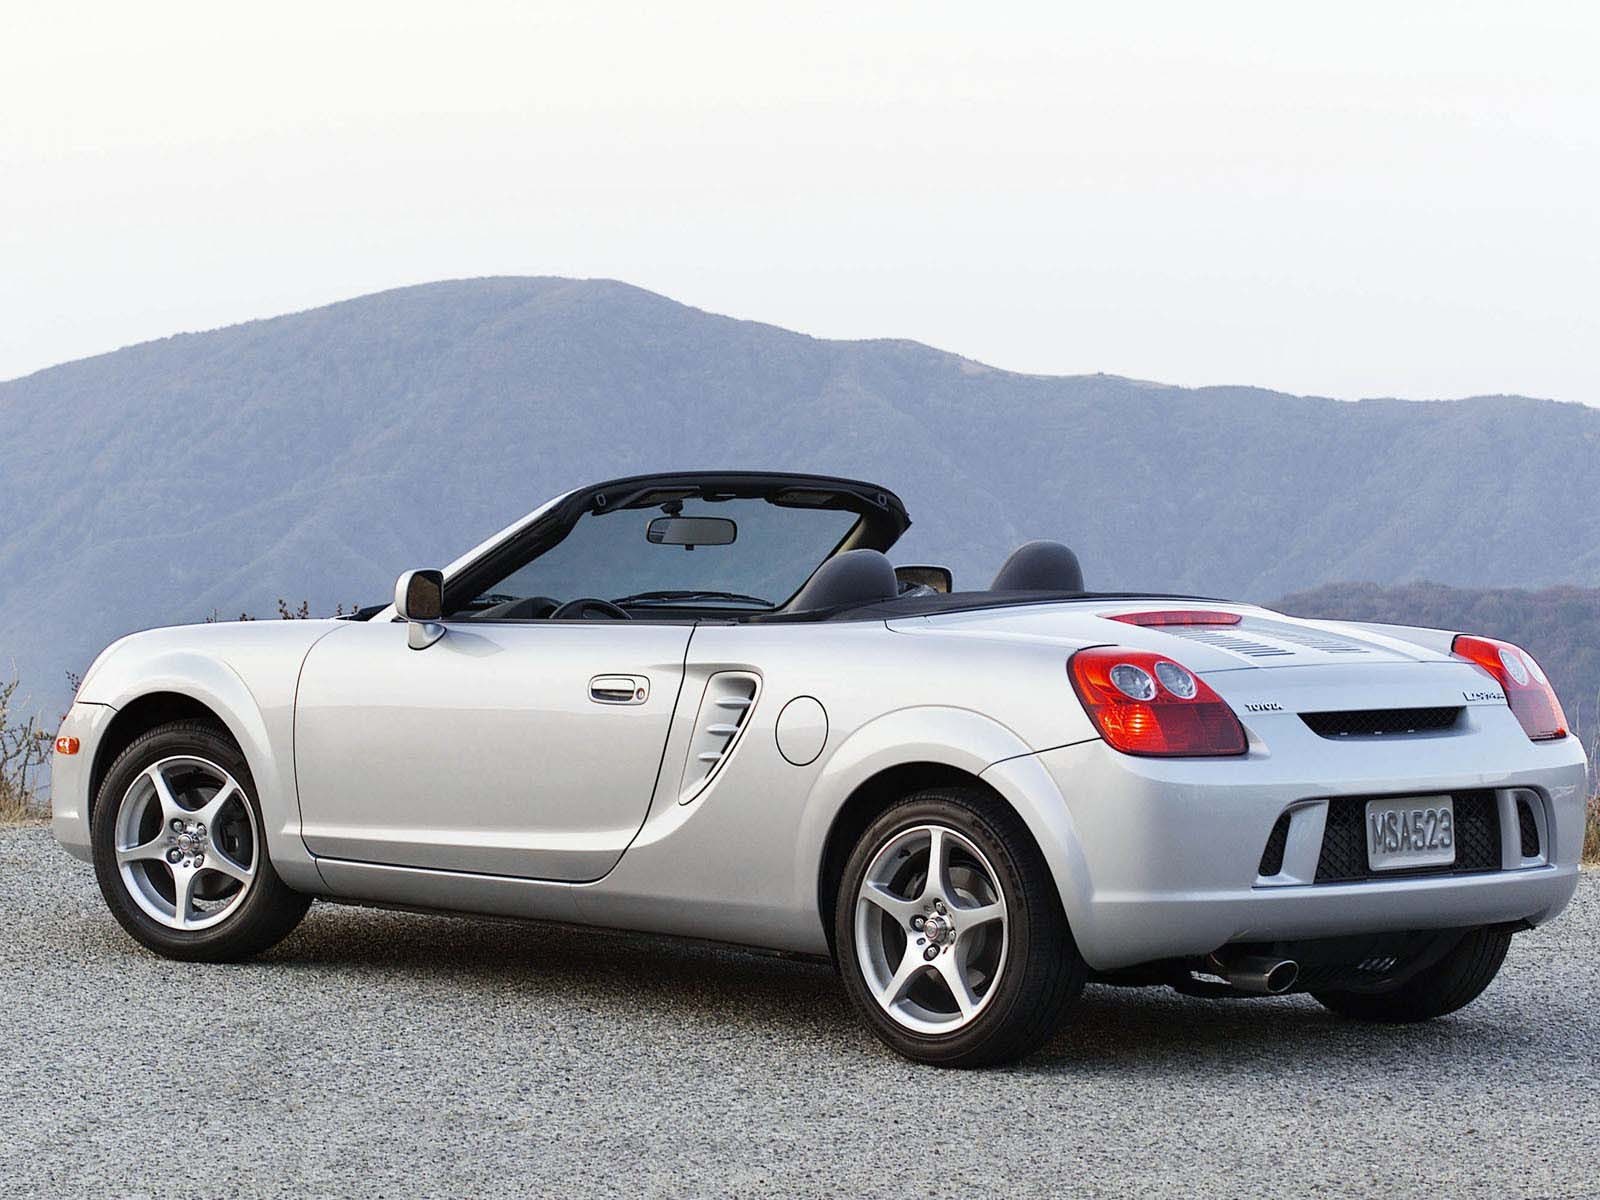 cars, Toyota, Vehicles, Toyota, Mr2, Silver, Cars Wallpaper